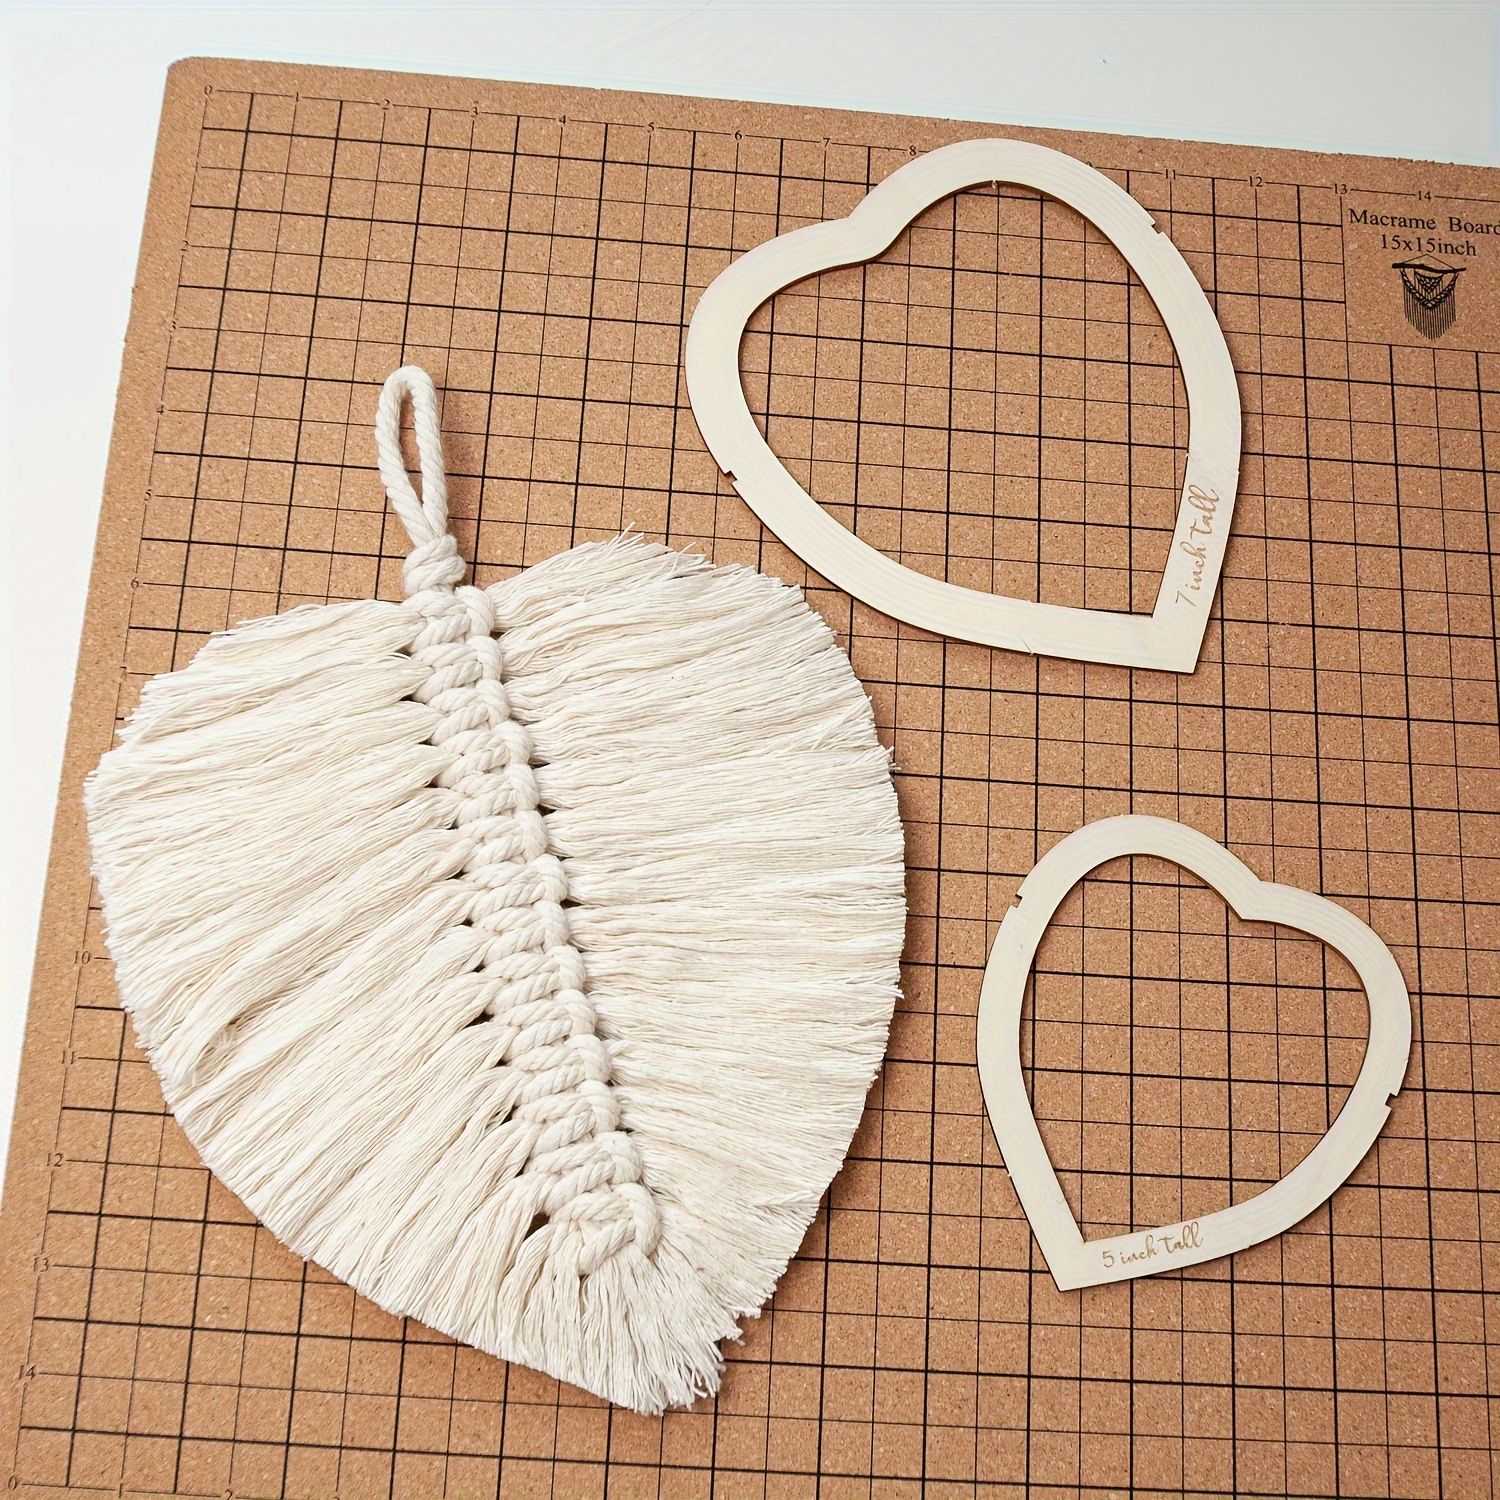  Macrame Board with Pins,Double Side Macrame Project Board with  Grids,12in Handmade Braiding Board with Instructions,Reusable Macrame Cork  Board for Cording Braiding Bracelet Braid Wigs Knotting String : Arts,  Crafts & Sewing